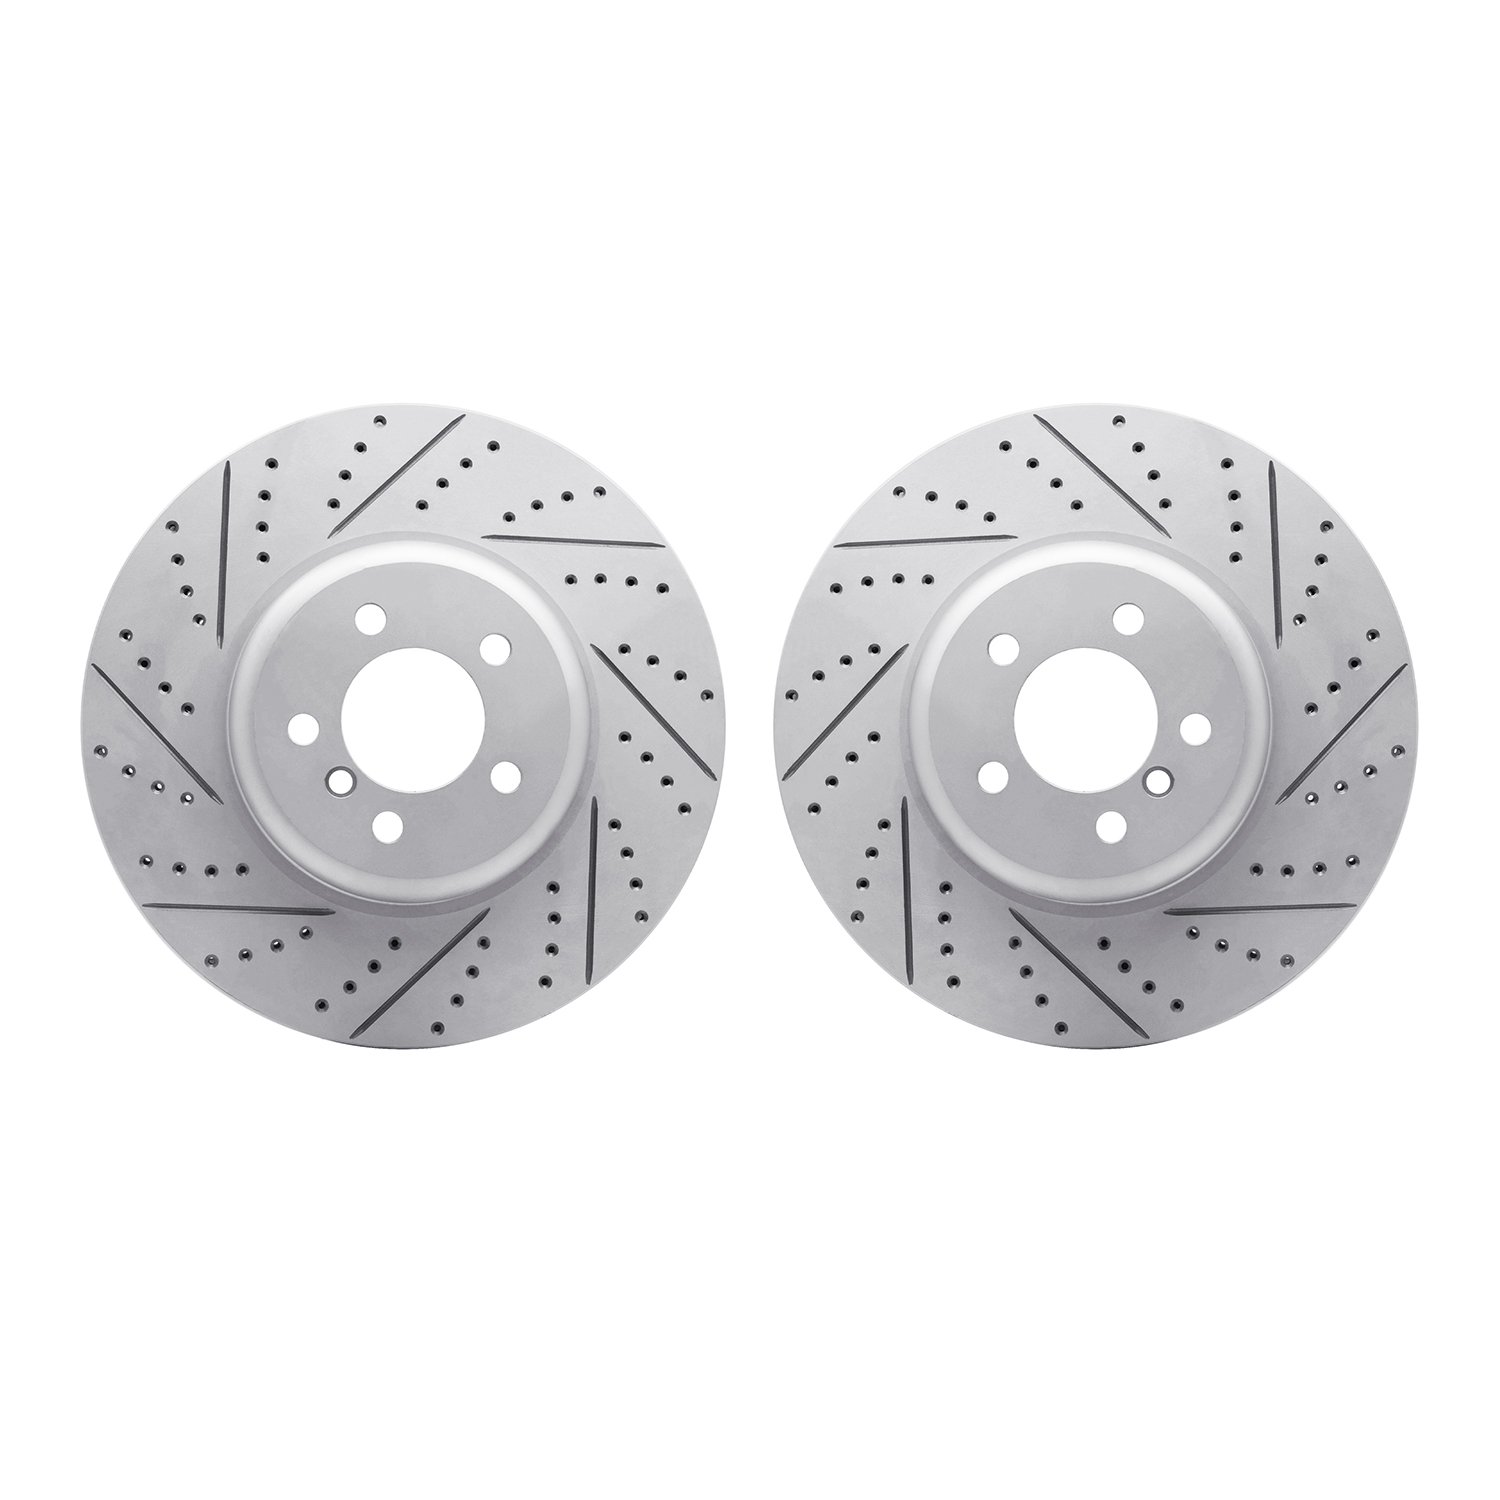 2002-31016 Geoperformance Drilled/Slotted Brake Rotors, 2013-2020 BMW, Position: Front